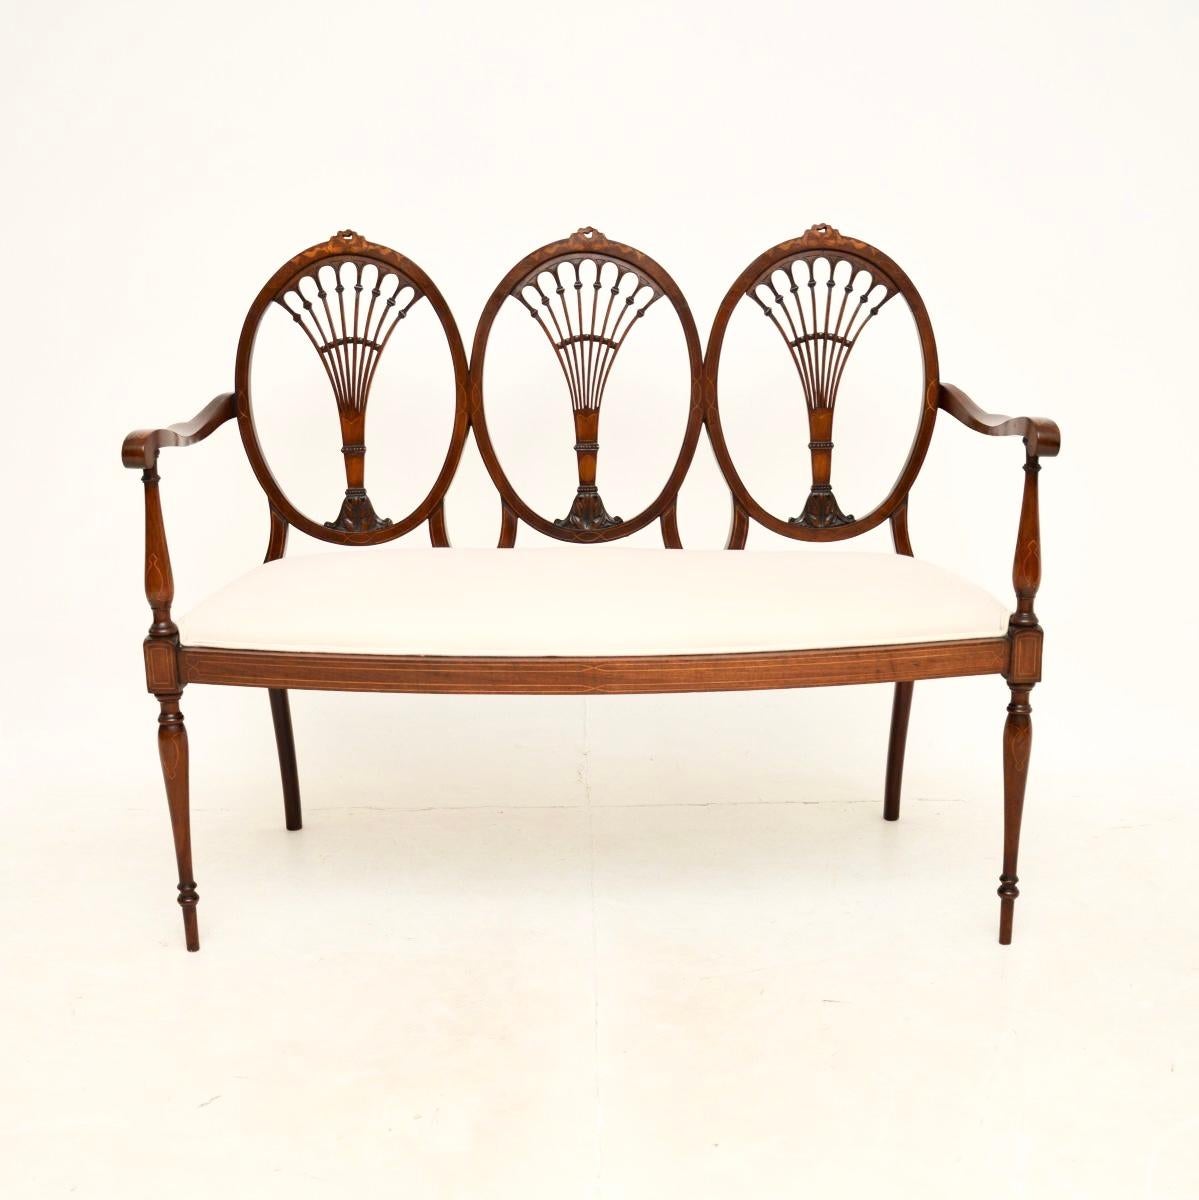 A beautiful antique Edwardian settee. This was made in England, it dates from the 1900-1910 period.

The quality is outstanding, this has a stunning design with three separate pierced oval backrests. There is gorgeous carving on the back rests and